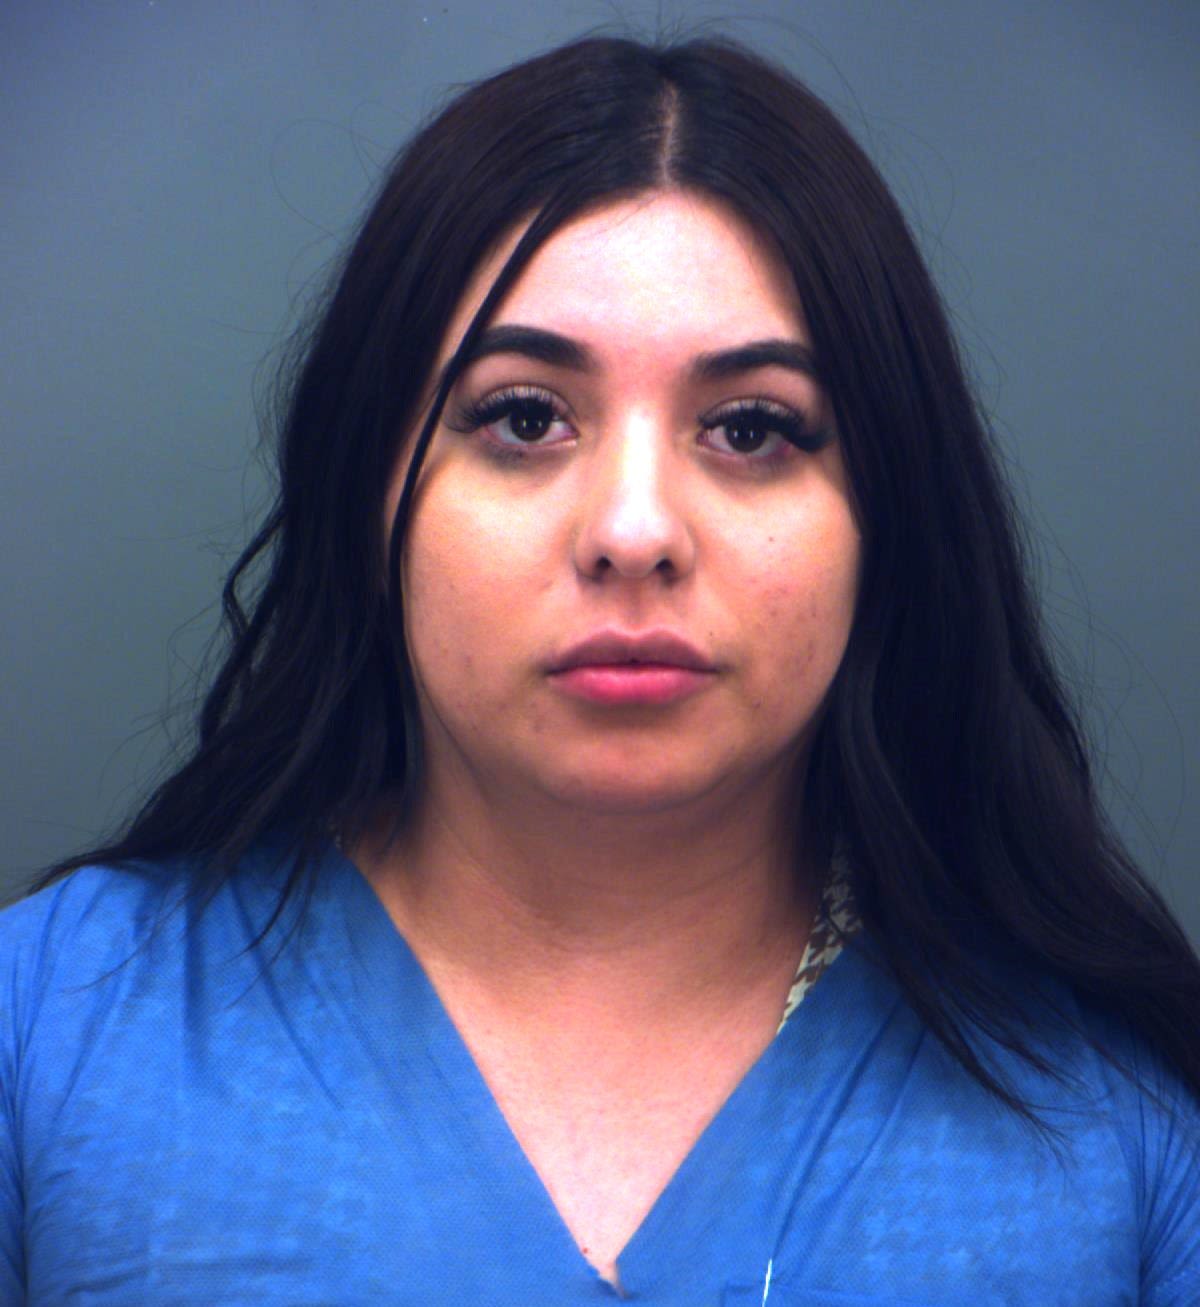 Driver arrested in hit-and-run that killed 21-year-old El Paso woman on Lee Trevino Drive